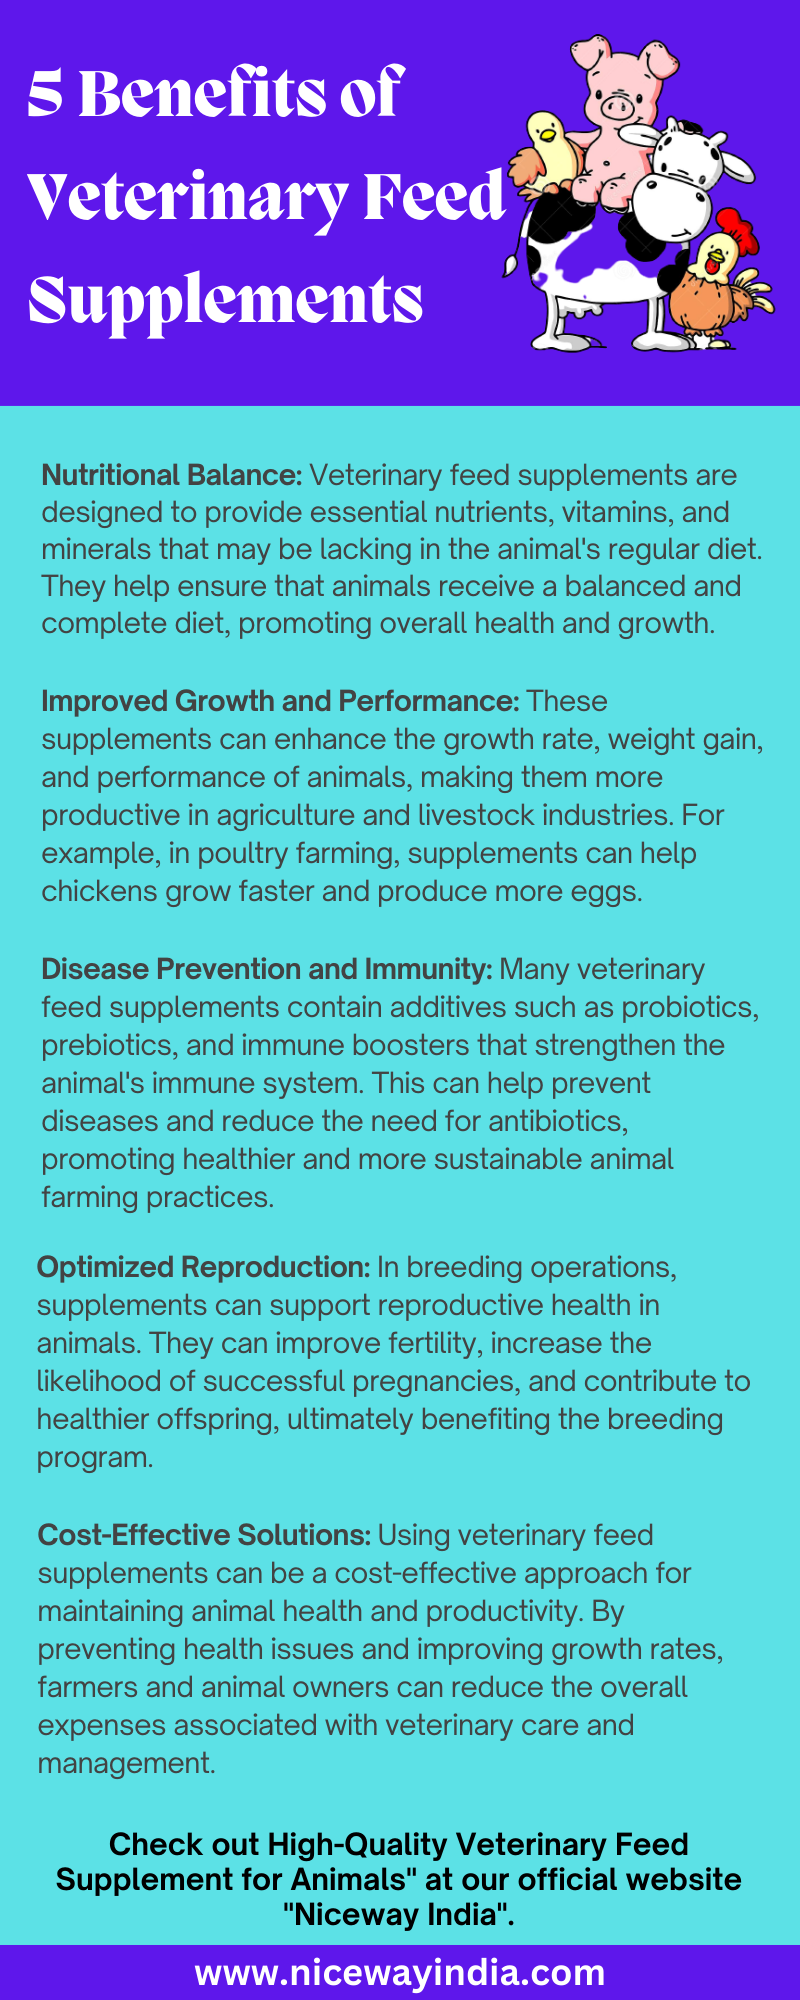 S Benefits of
Veterinary Feed’

Supplements

 

Nutritional Balance: Veterinary feed supplements are
designed to provide essential nutrients, vitamins, and
minerals that may be lacking in the animal's regular diet.
They help ensure that animals receive a balanced and
complete diet, promoting overall health and growth.

Improved Growth and Performance: These
supplements can enhance the growth rate, weight gain,
and performance of animals, making them more
productive in agriculture and livestock industries. For
example, in poultry farming, supplements can help
chickens grow faster and produce more eggs.

Disease Prevention and Immunity: Many veterinary
feed supplements contain additives such as probiotics,
prebiotics, and immune boosters that strengthen the
animal's immune system. This can help prevent
diseases and reduce the need for antibiotics,
promoting healthier and more sustainable animal
farming practices.

Optimized Reproduction: In breeding operations,
supplements can support reproductive health in
animals. They can improve fertility, increase the
likelihood of successful pregnancies, and contribute to
healthier offspring, ultimately benefiting the breeding
program.

Cost-Effective Solutions: Using veterinary feed
supplements can be a cost-effective approach for
maintaining animal health and productivity. By
preventing health issues and improving growth rates,
farmers and animal owners can reduce the overall
expenses associated with veterinary care and
management.

Check out High-Quality Veterinary Feed
Supplement for Animals" at our official website
"Niceway India".

www.nicewayindia.com